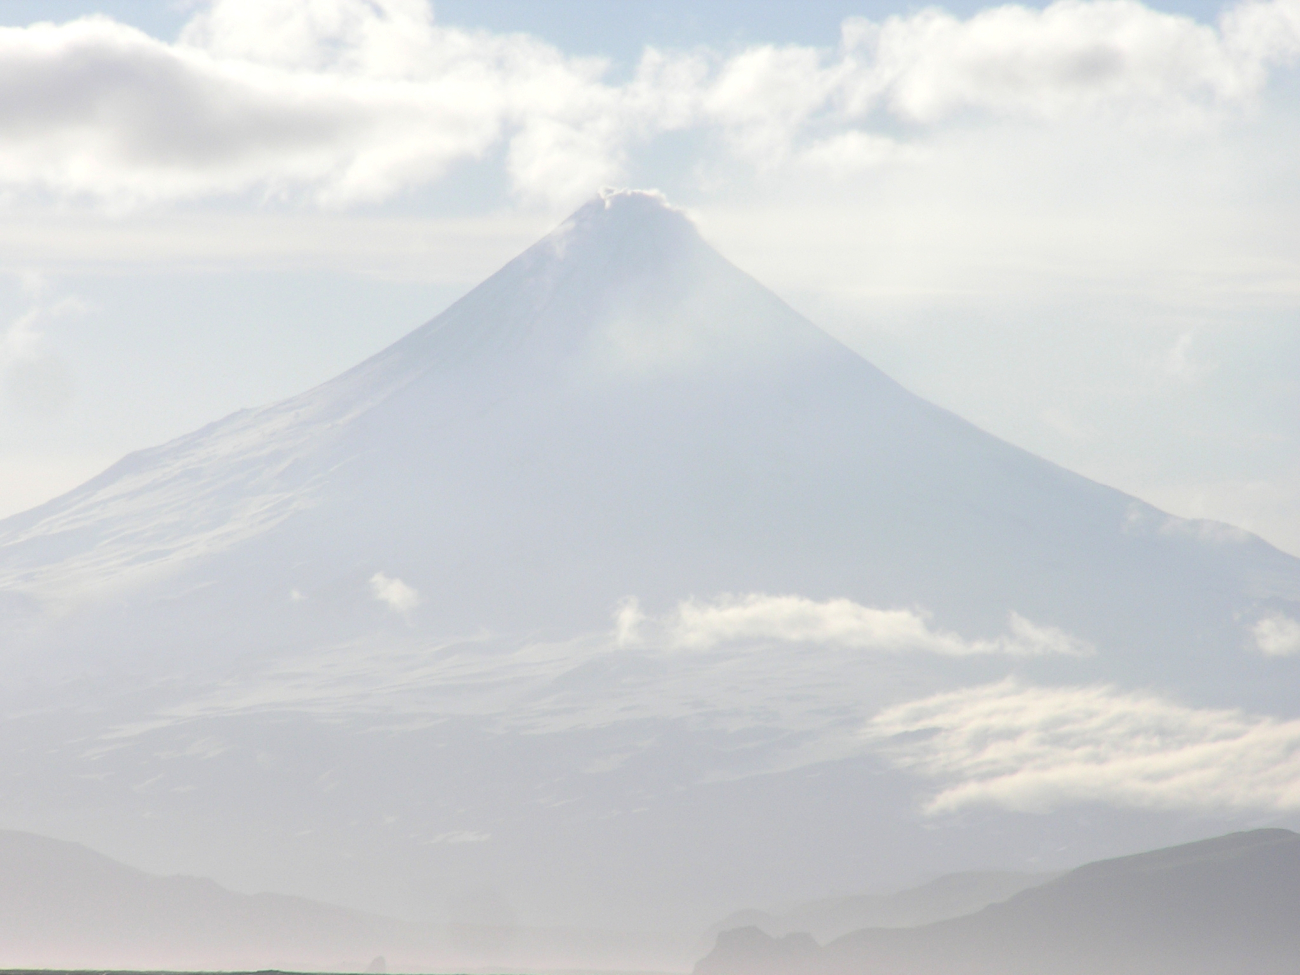 Shishaldin Volcano, among the most perfectly symmetrical volcanic cones on Earth